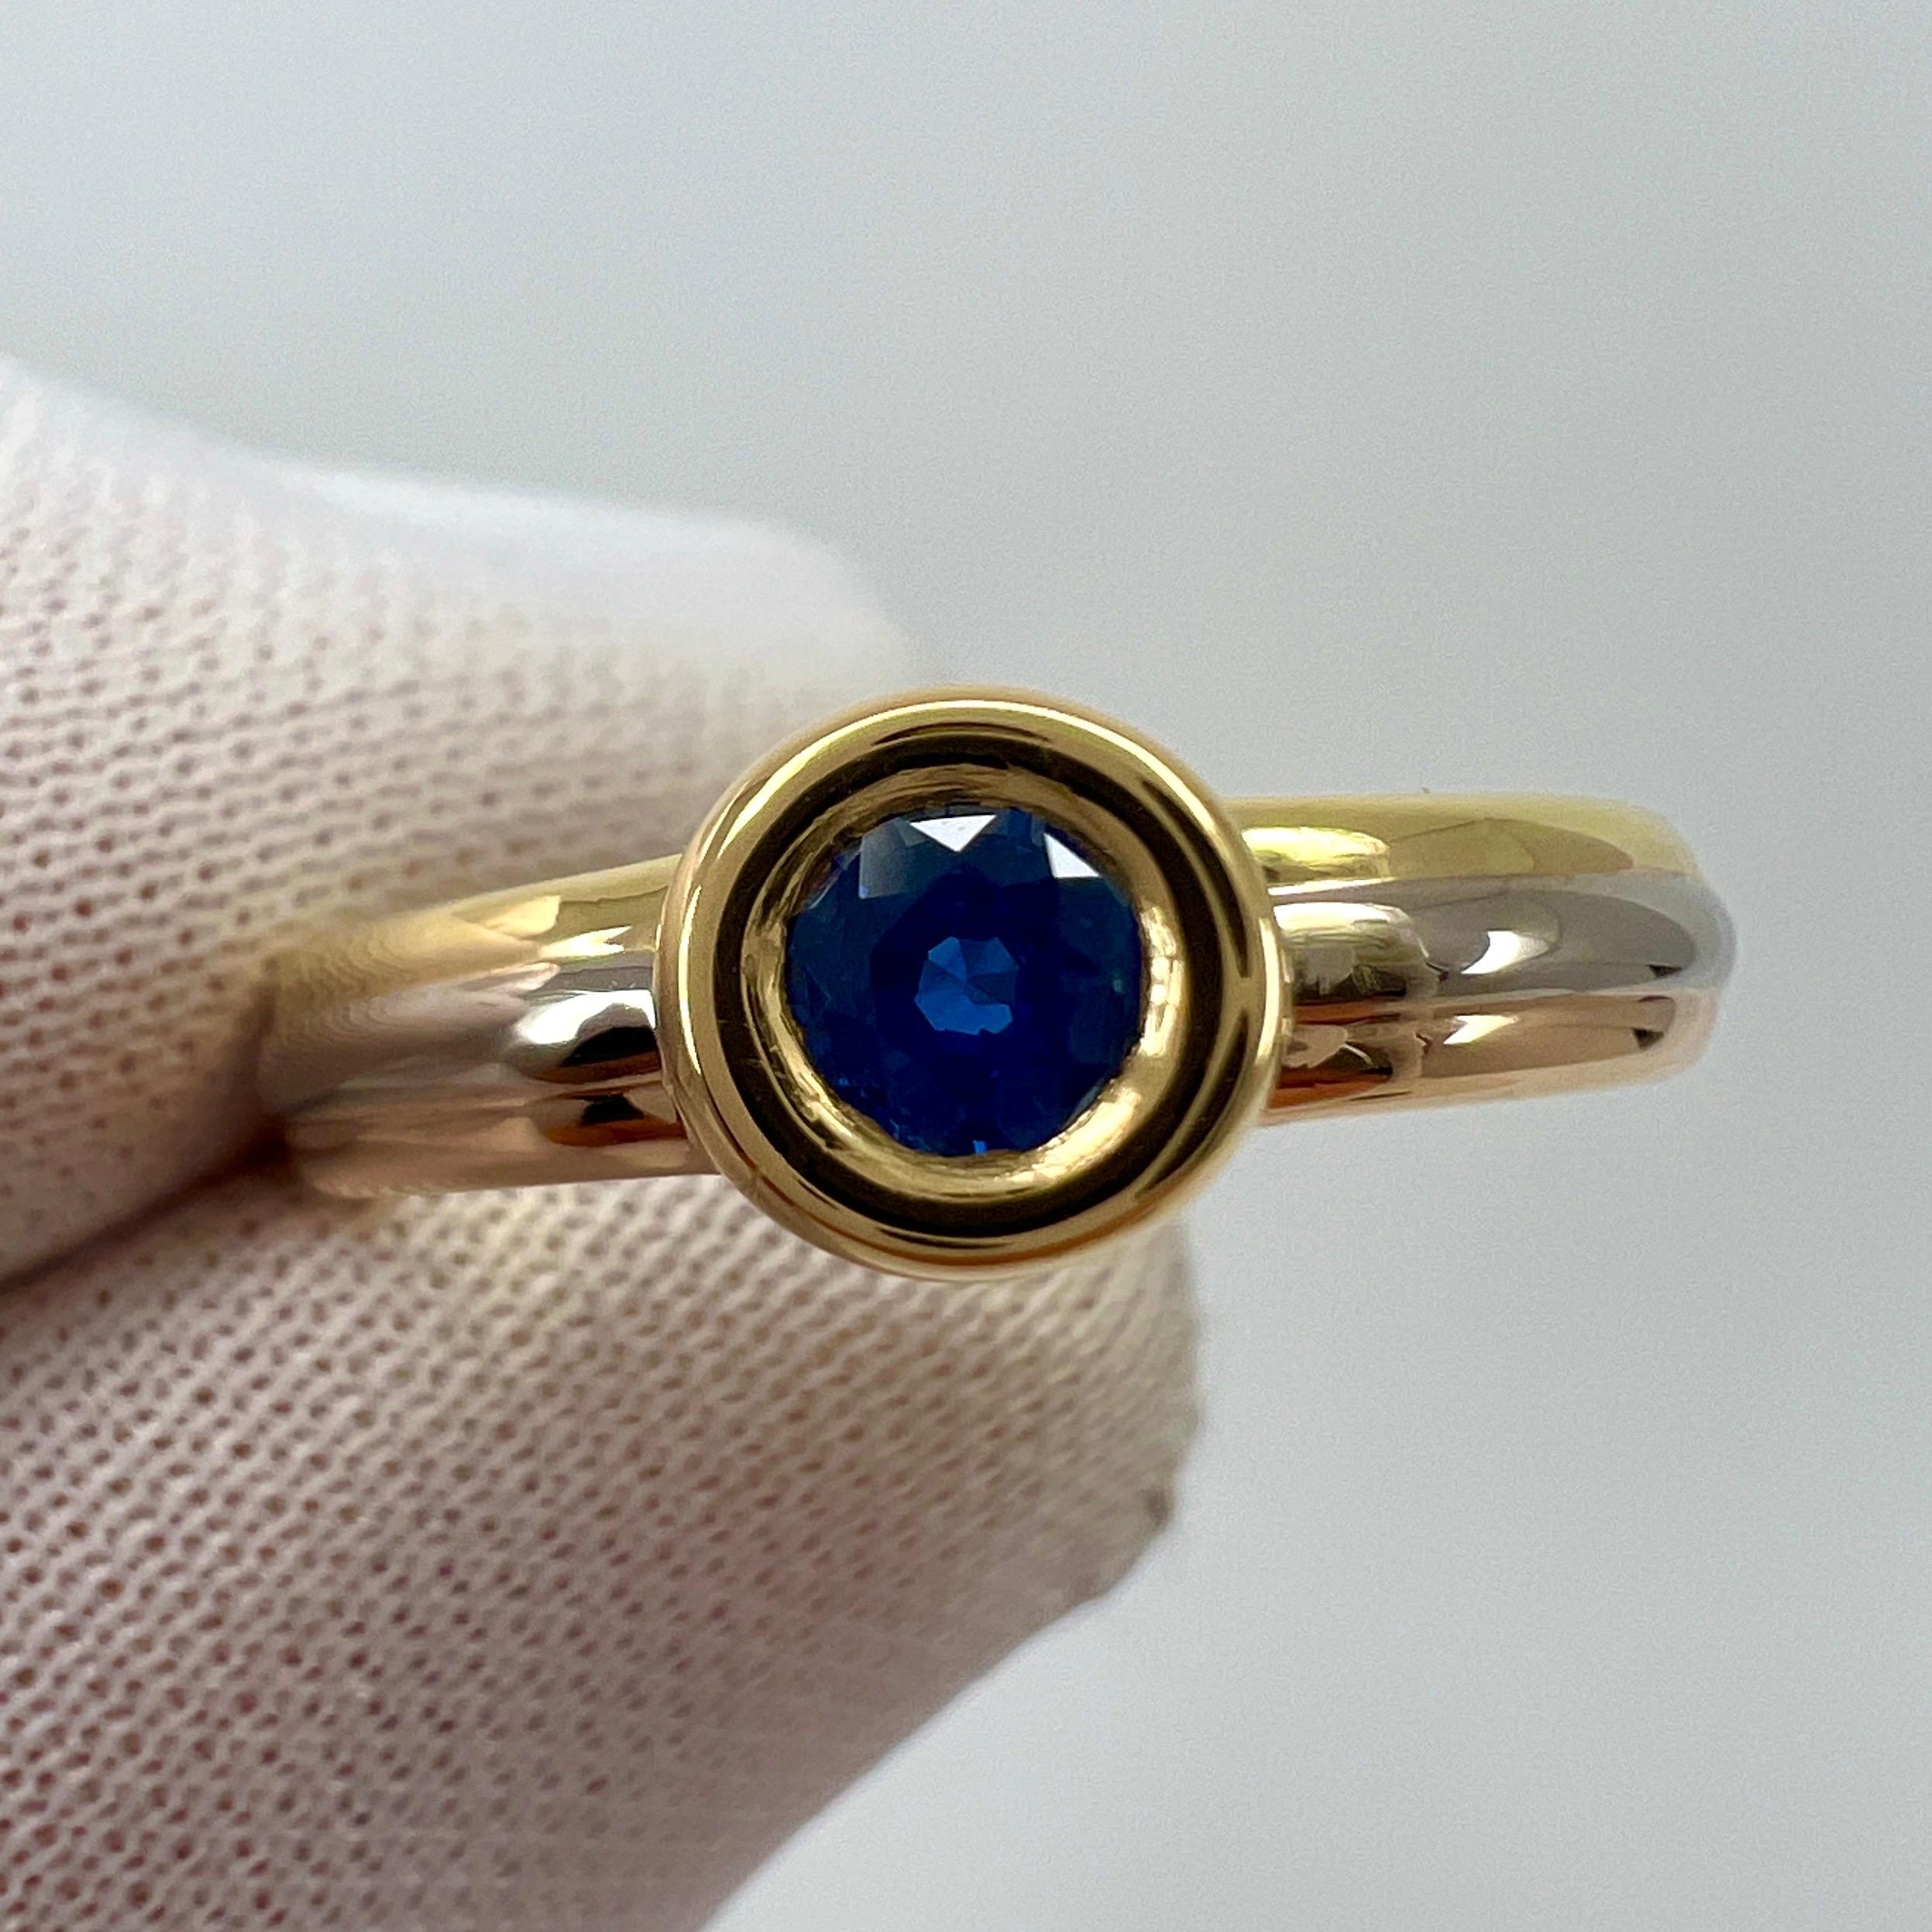 Vintage Cartier Round Cut Sapphire 18k Tri Colour/Multi Tone Gold Solitaire Ring.

Stunning multi tone gold ring set with a fine vivid blue sapphire. Fine jewellery houses like Cartier only use the finest of gemstones and this sapphire is no